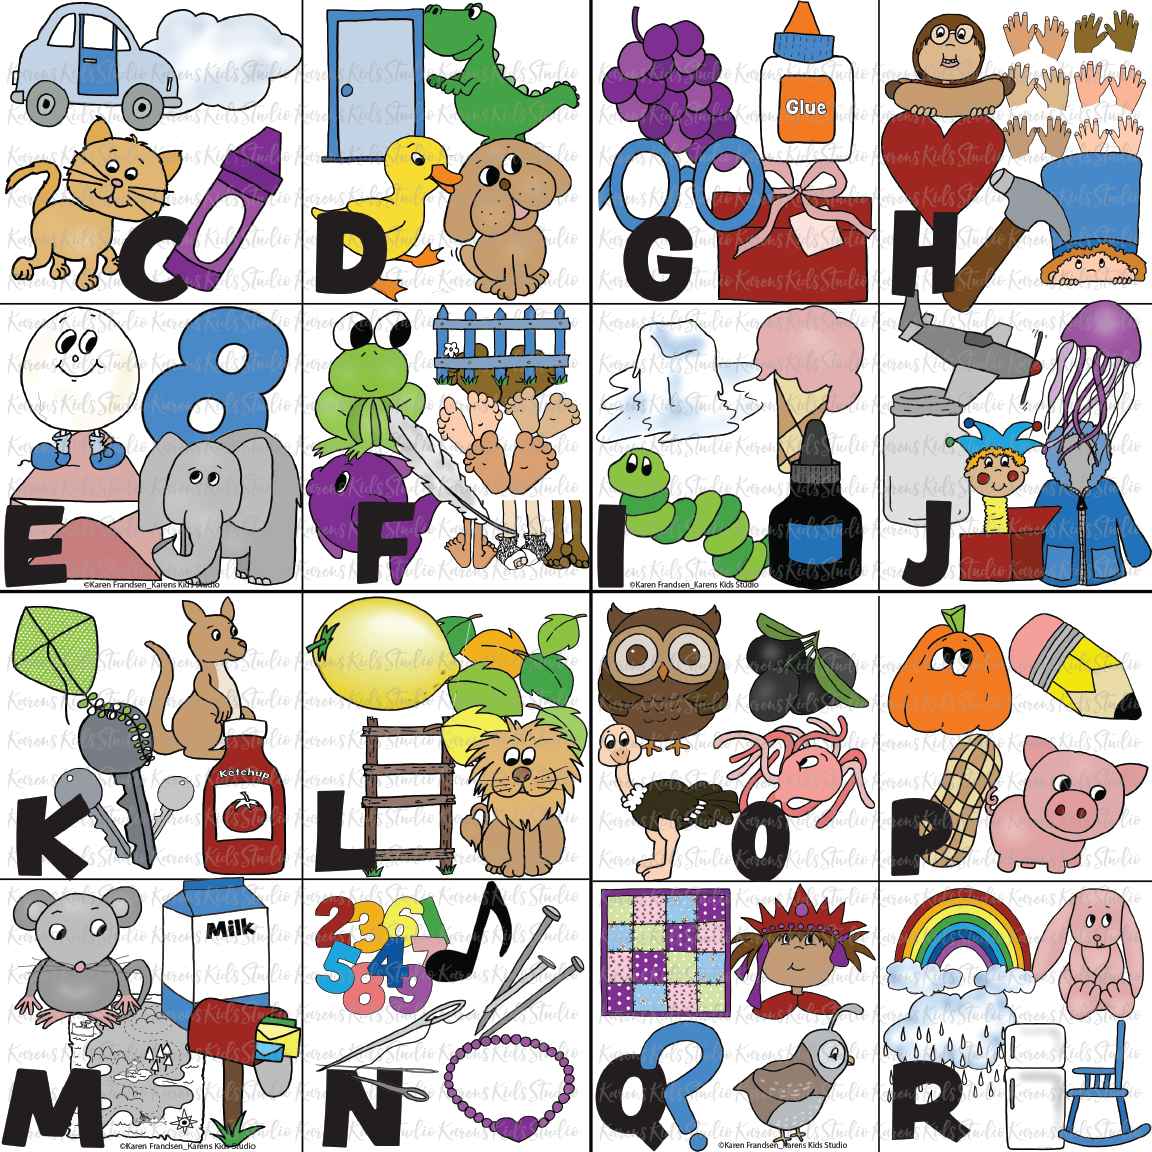 16 boxes each with a black letter and 4 colorful clipart pictures that begin with that letter. The letter C has a cat, crayon, cloud, car. D has dinosaur, door, dog, duck. G: glasses, grapes, glue, gift and more. 